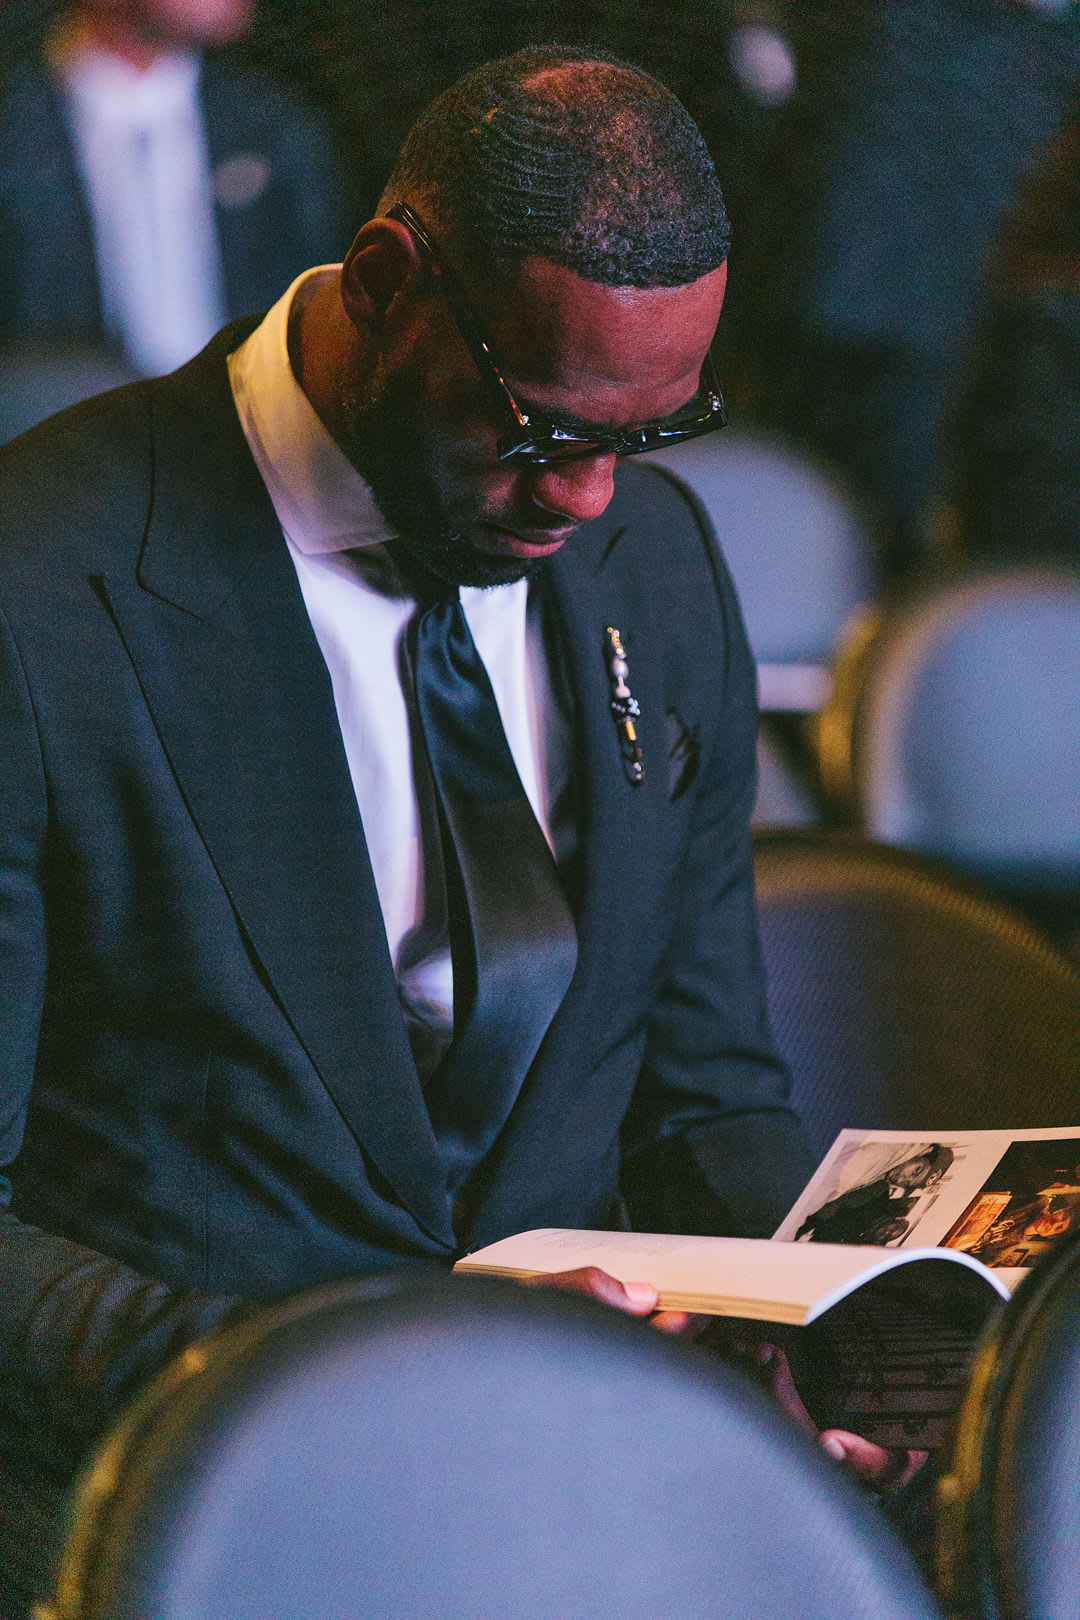 Photos From Nipsey Hussle Memorial Service Highlight Rapper's Far-Reaching Impact ...